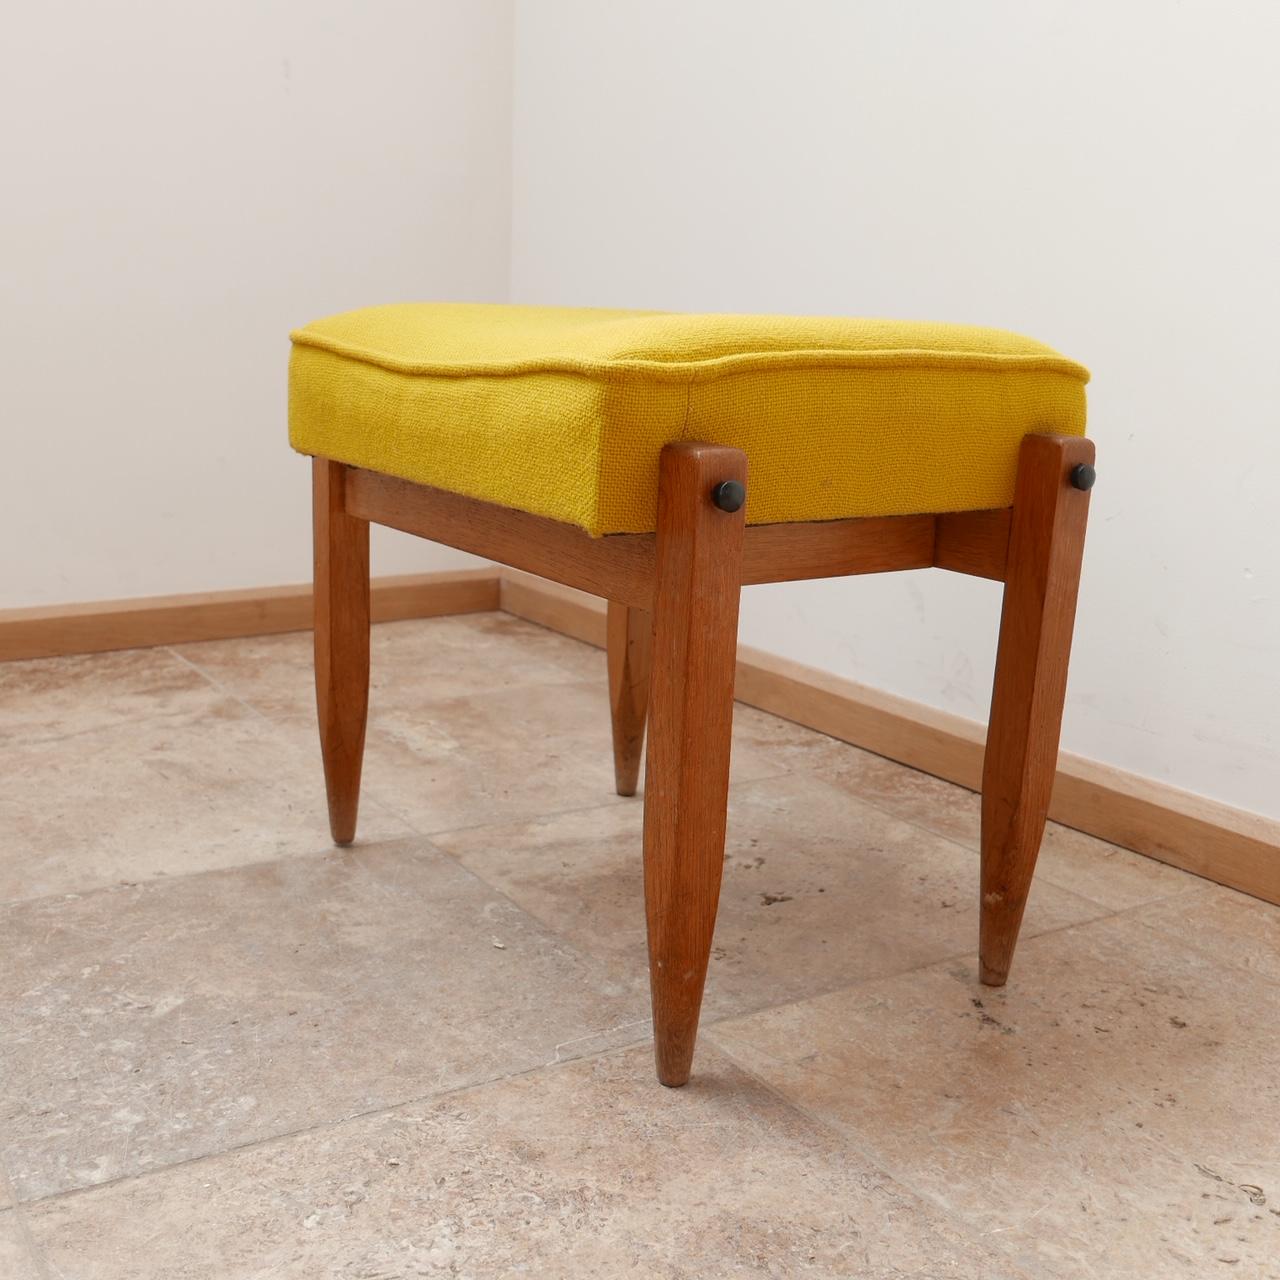 A rare stool by French design legends by Guillerme et Chambron. 

France, c1960s. 

Original upholstery retained in great condition but could be updated easily to taste. 

Solid oak structure. 

Good condition, some scuffs and marks